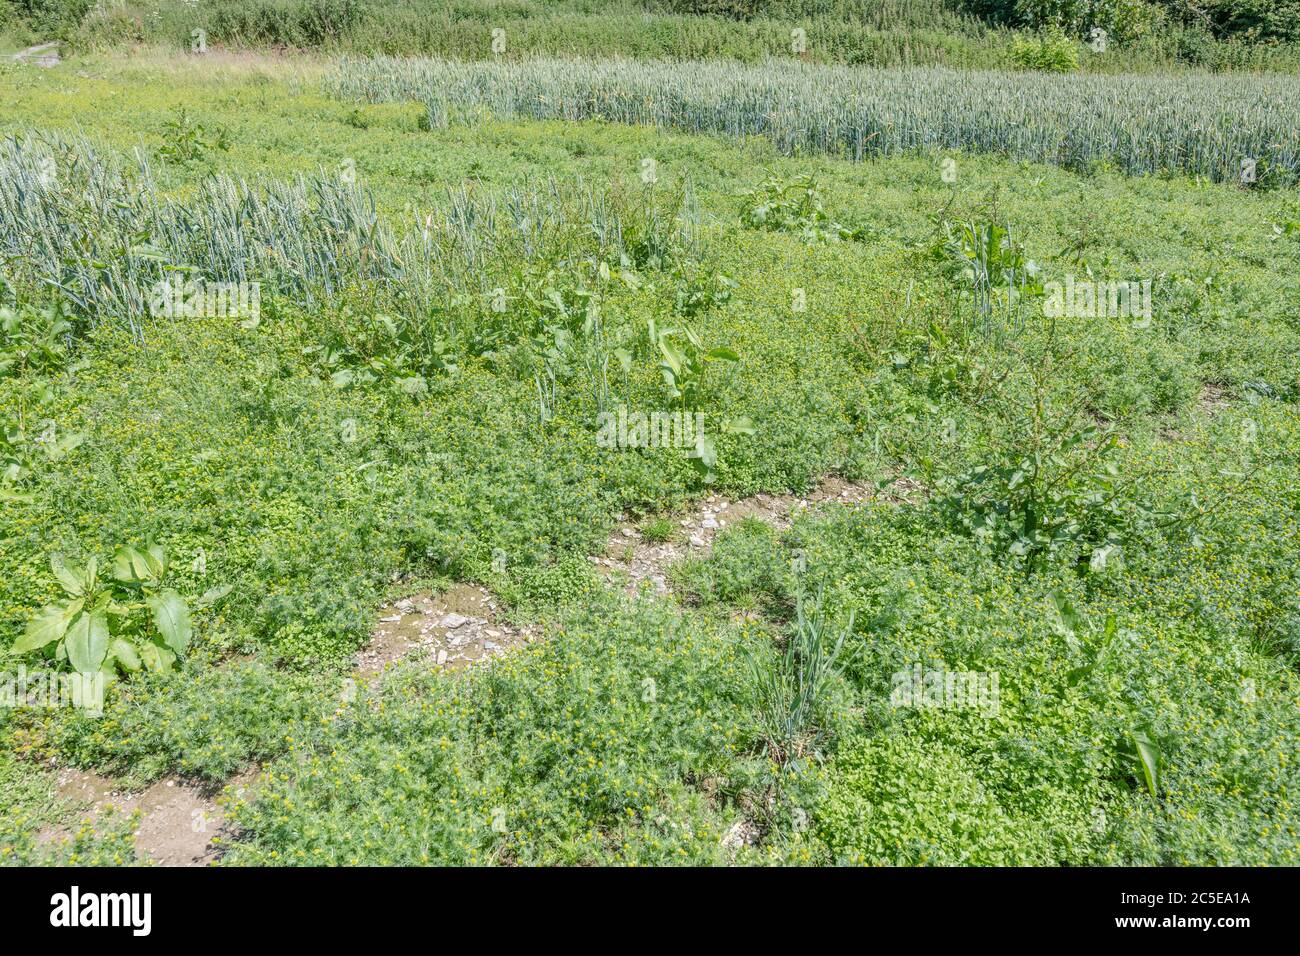 Area of cropped wheat field with masses of common arable weeds. Mainly  Pineappleweed / Matricaria discoidea & Broad-Leaved Dock / Rumex obtusifolius. Stock Photo